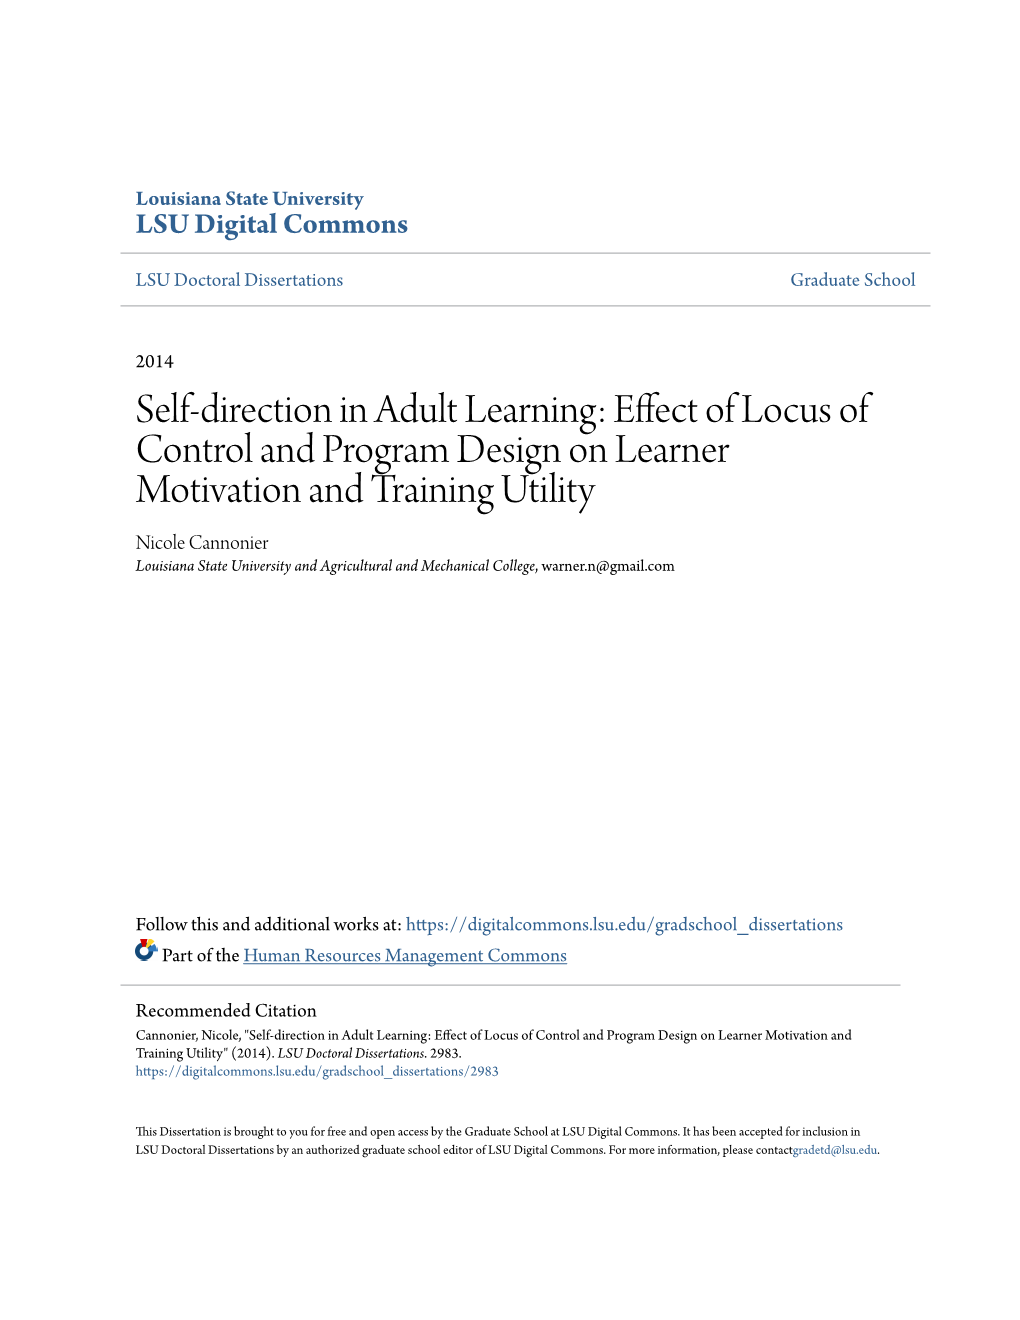 Effect of Locus of Control and Program Design on Learner Motivation